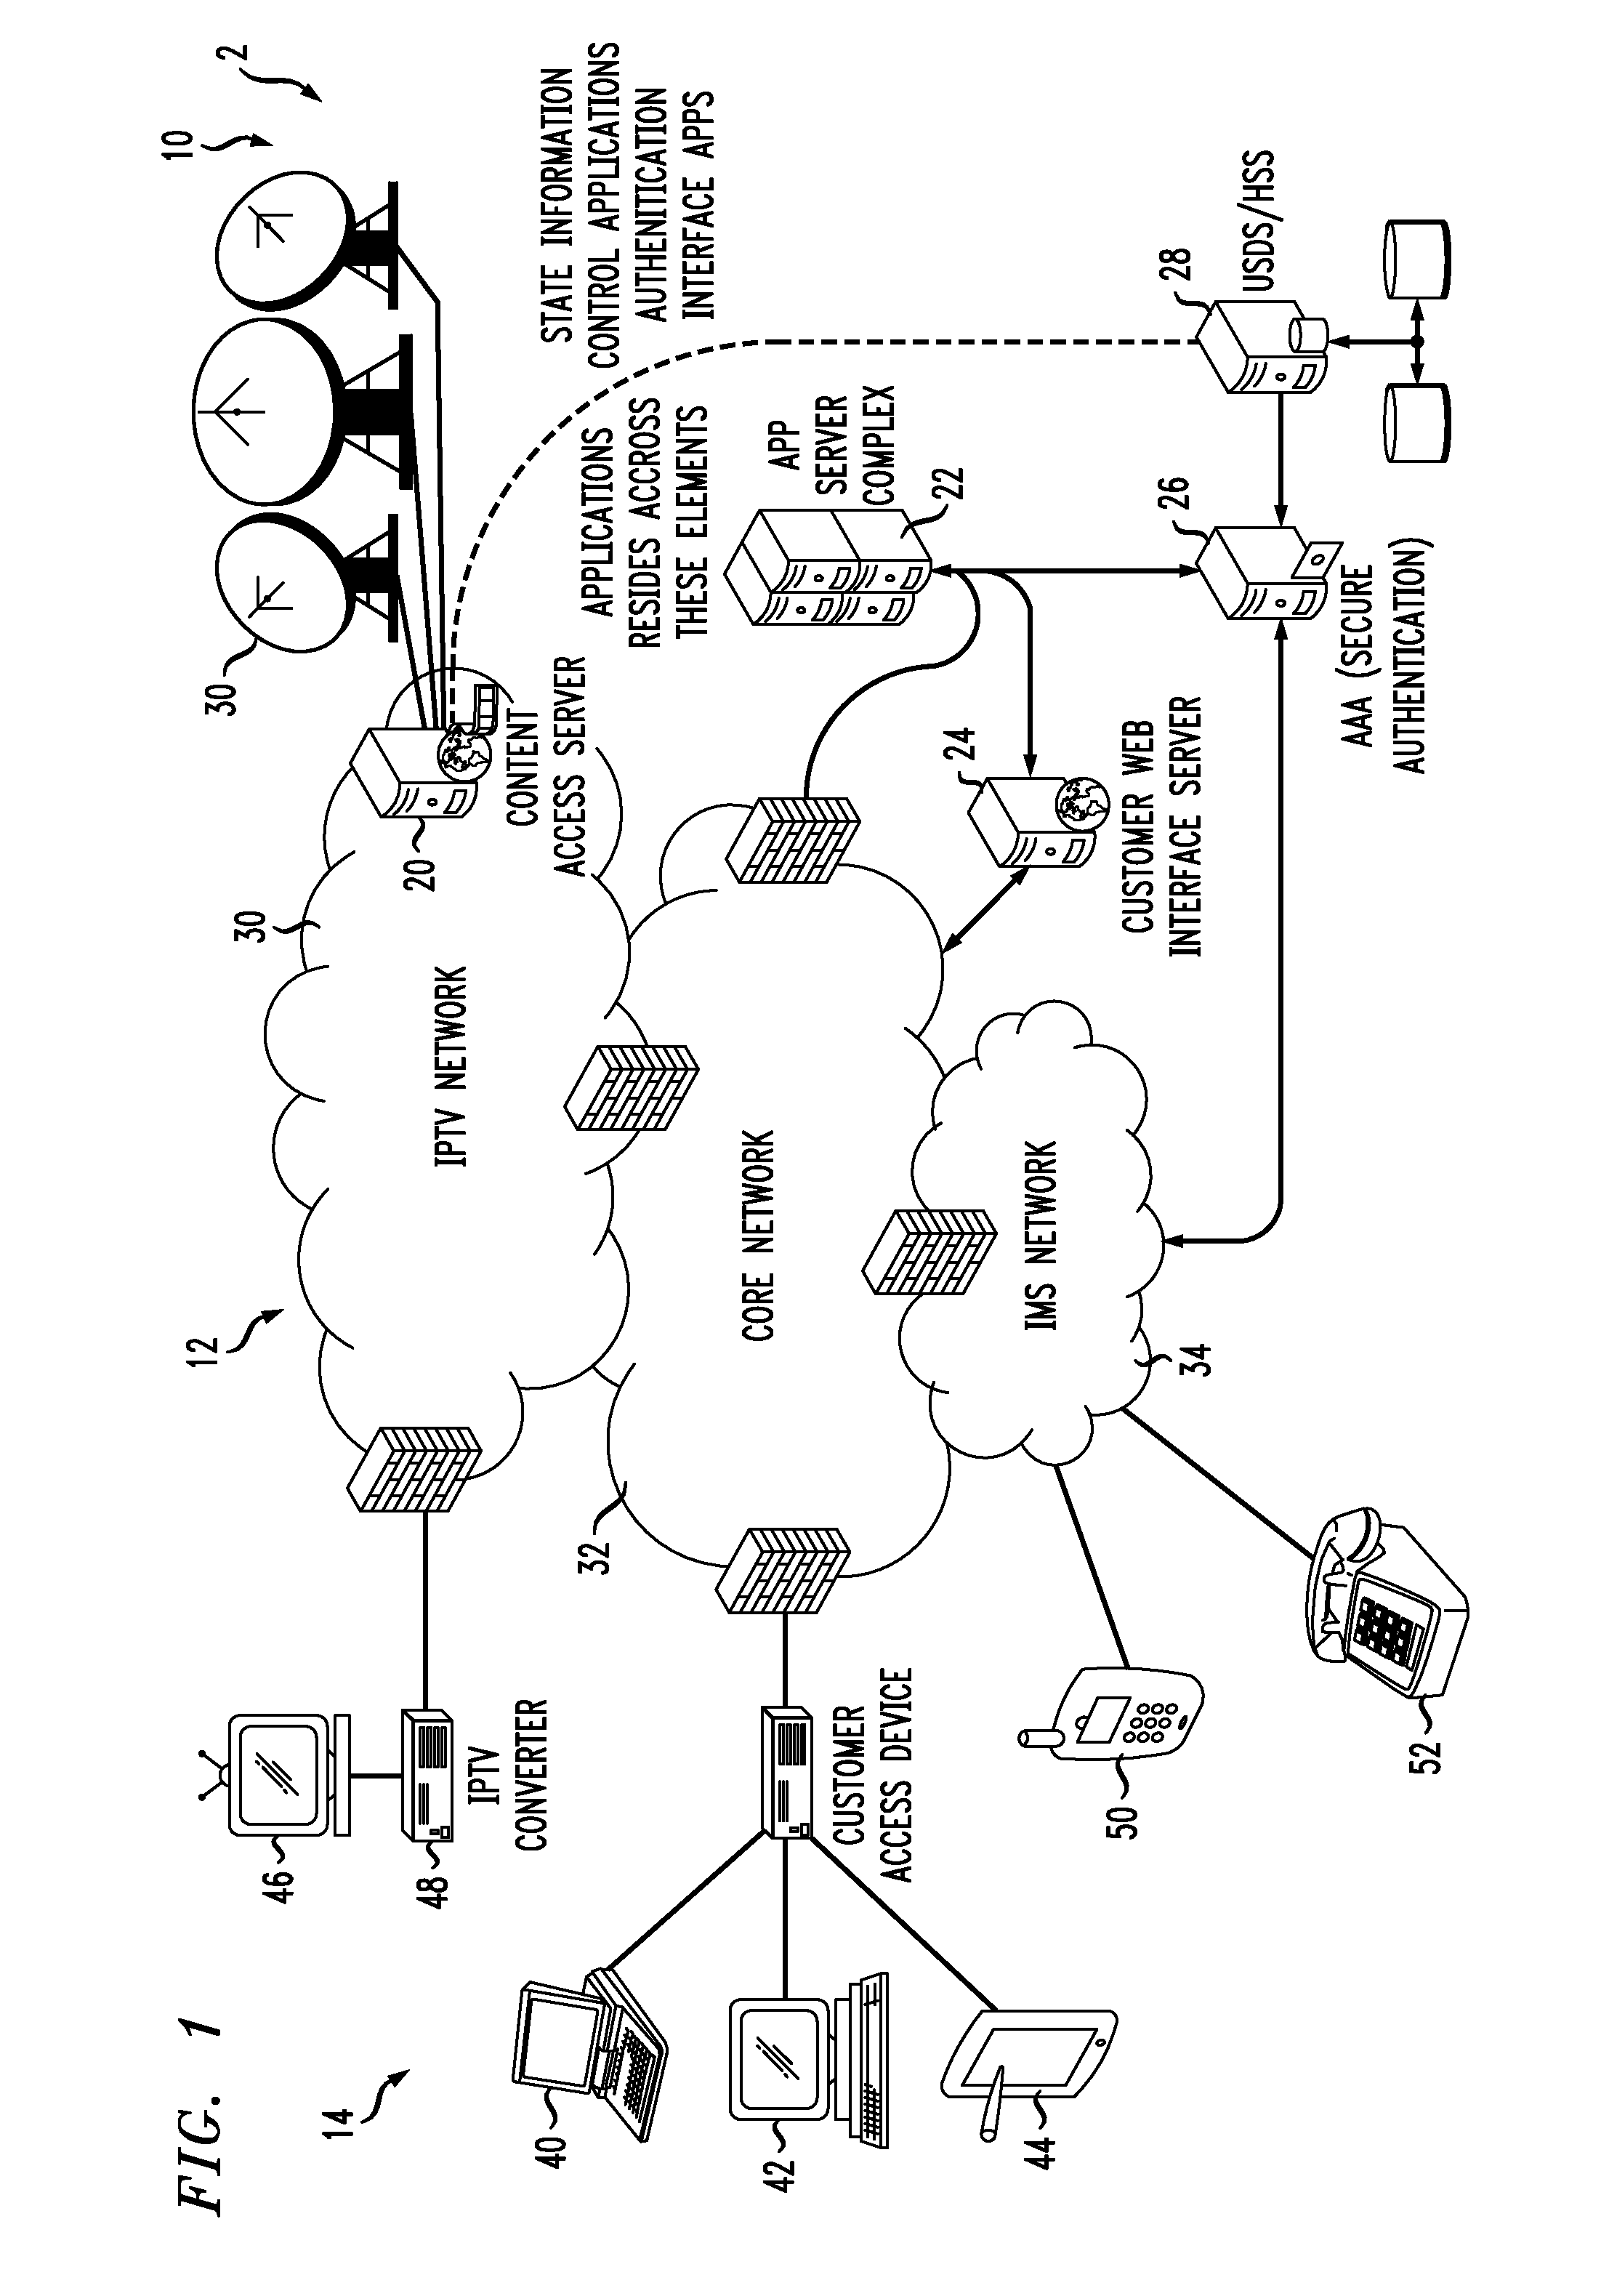 Method and apparatus for personalized multi-user centralized control and filtering of IPTV content